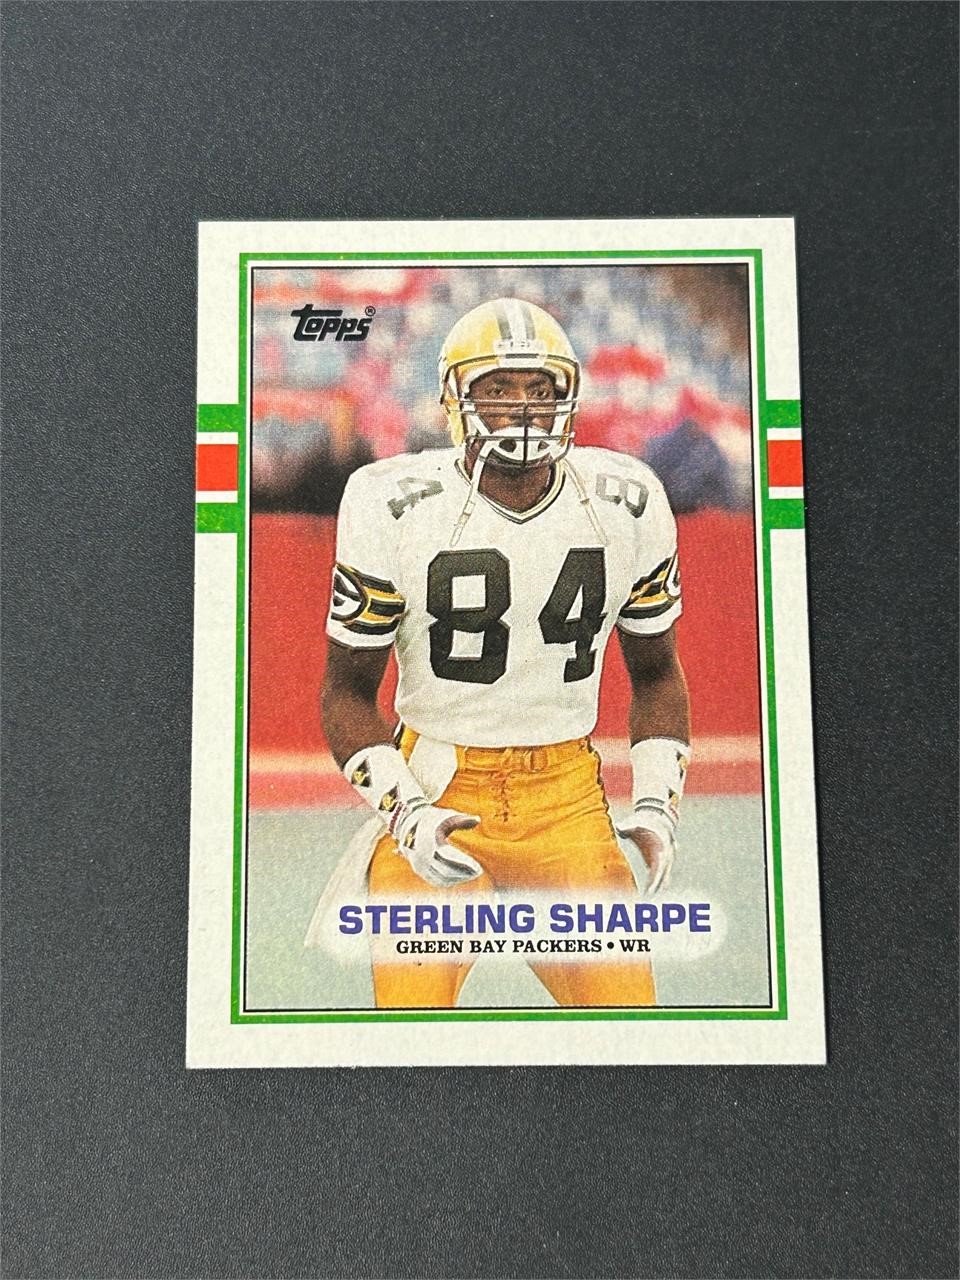 1989 Topps Sterling Sharpe Rookie Card